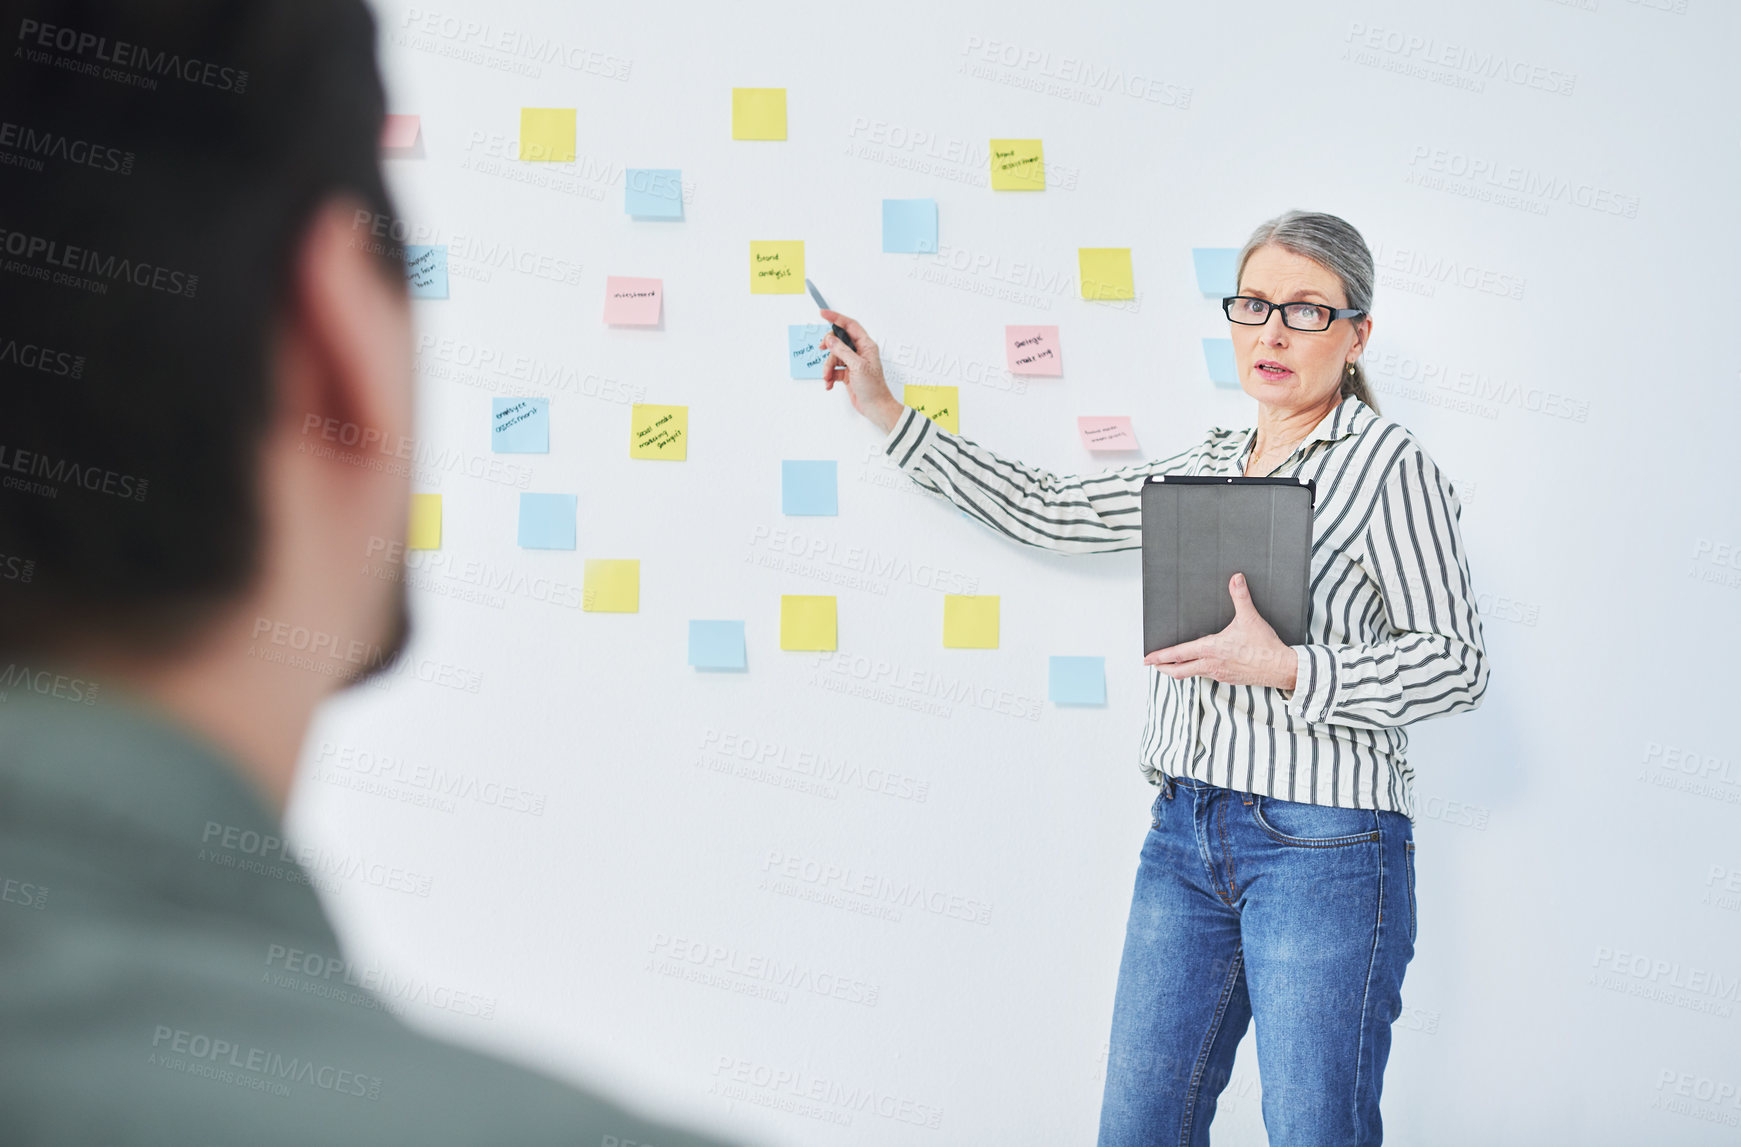 Buy stock photo Shot of a mature businesswoman giving a presentation with notes on a wall in an office